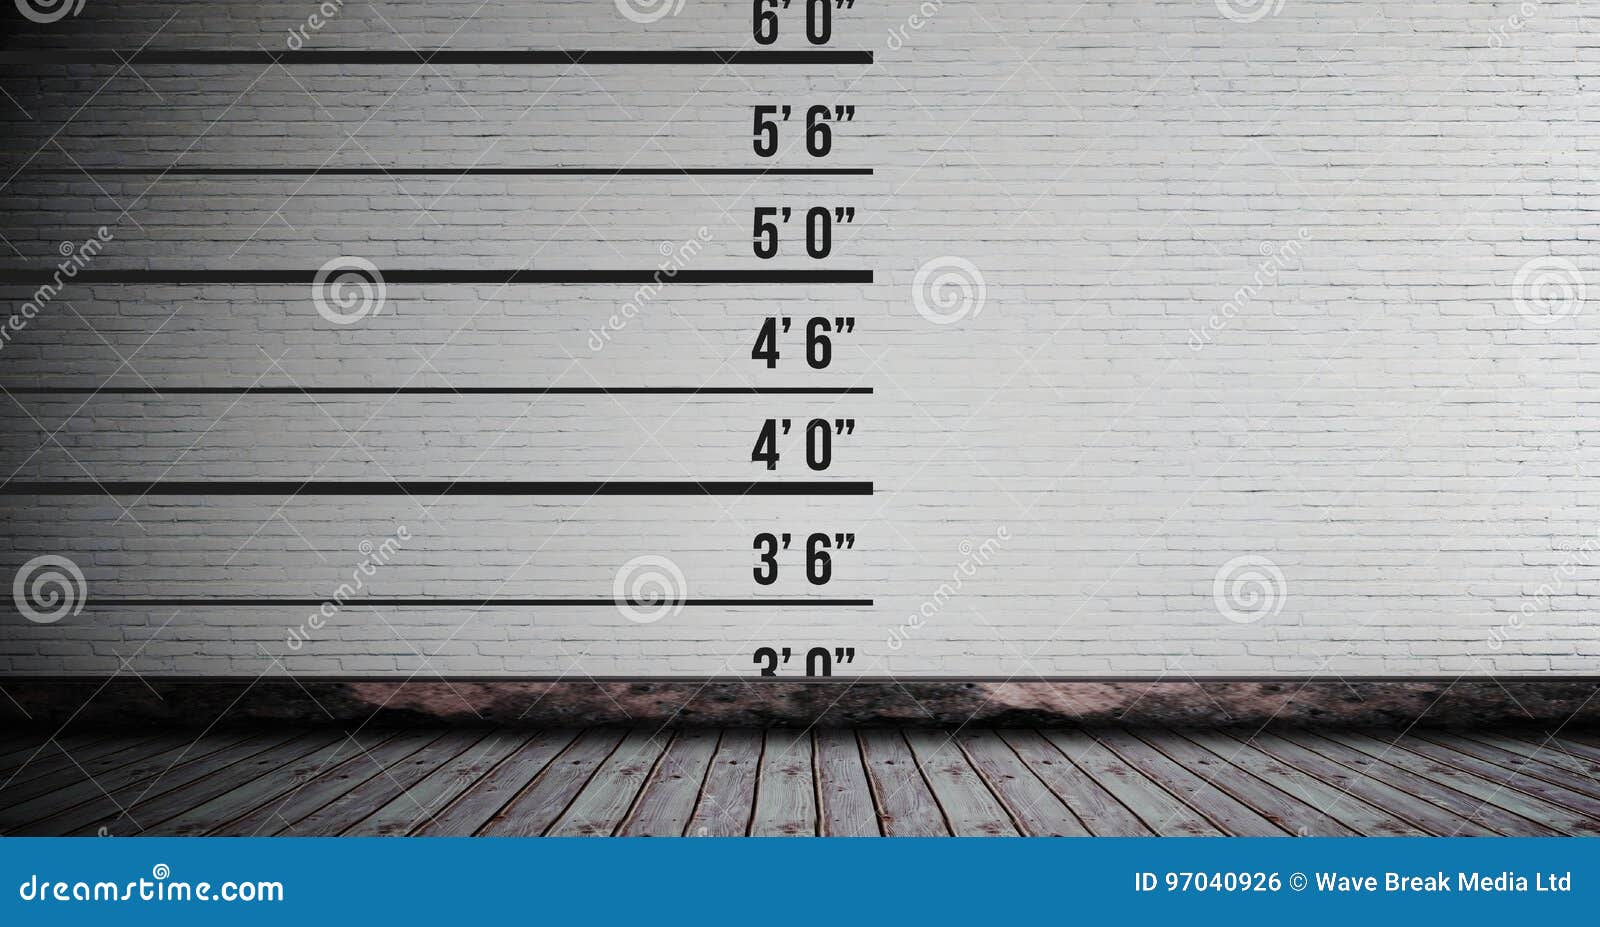 Height Measurement Chart on Wall Stock Photo - Image of graphic,  communication: 97040926